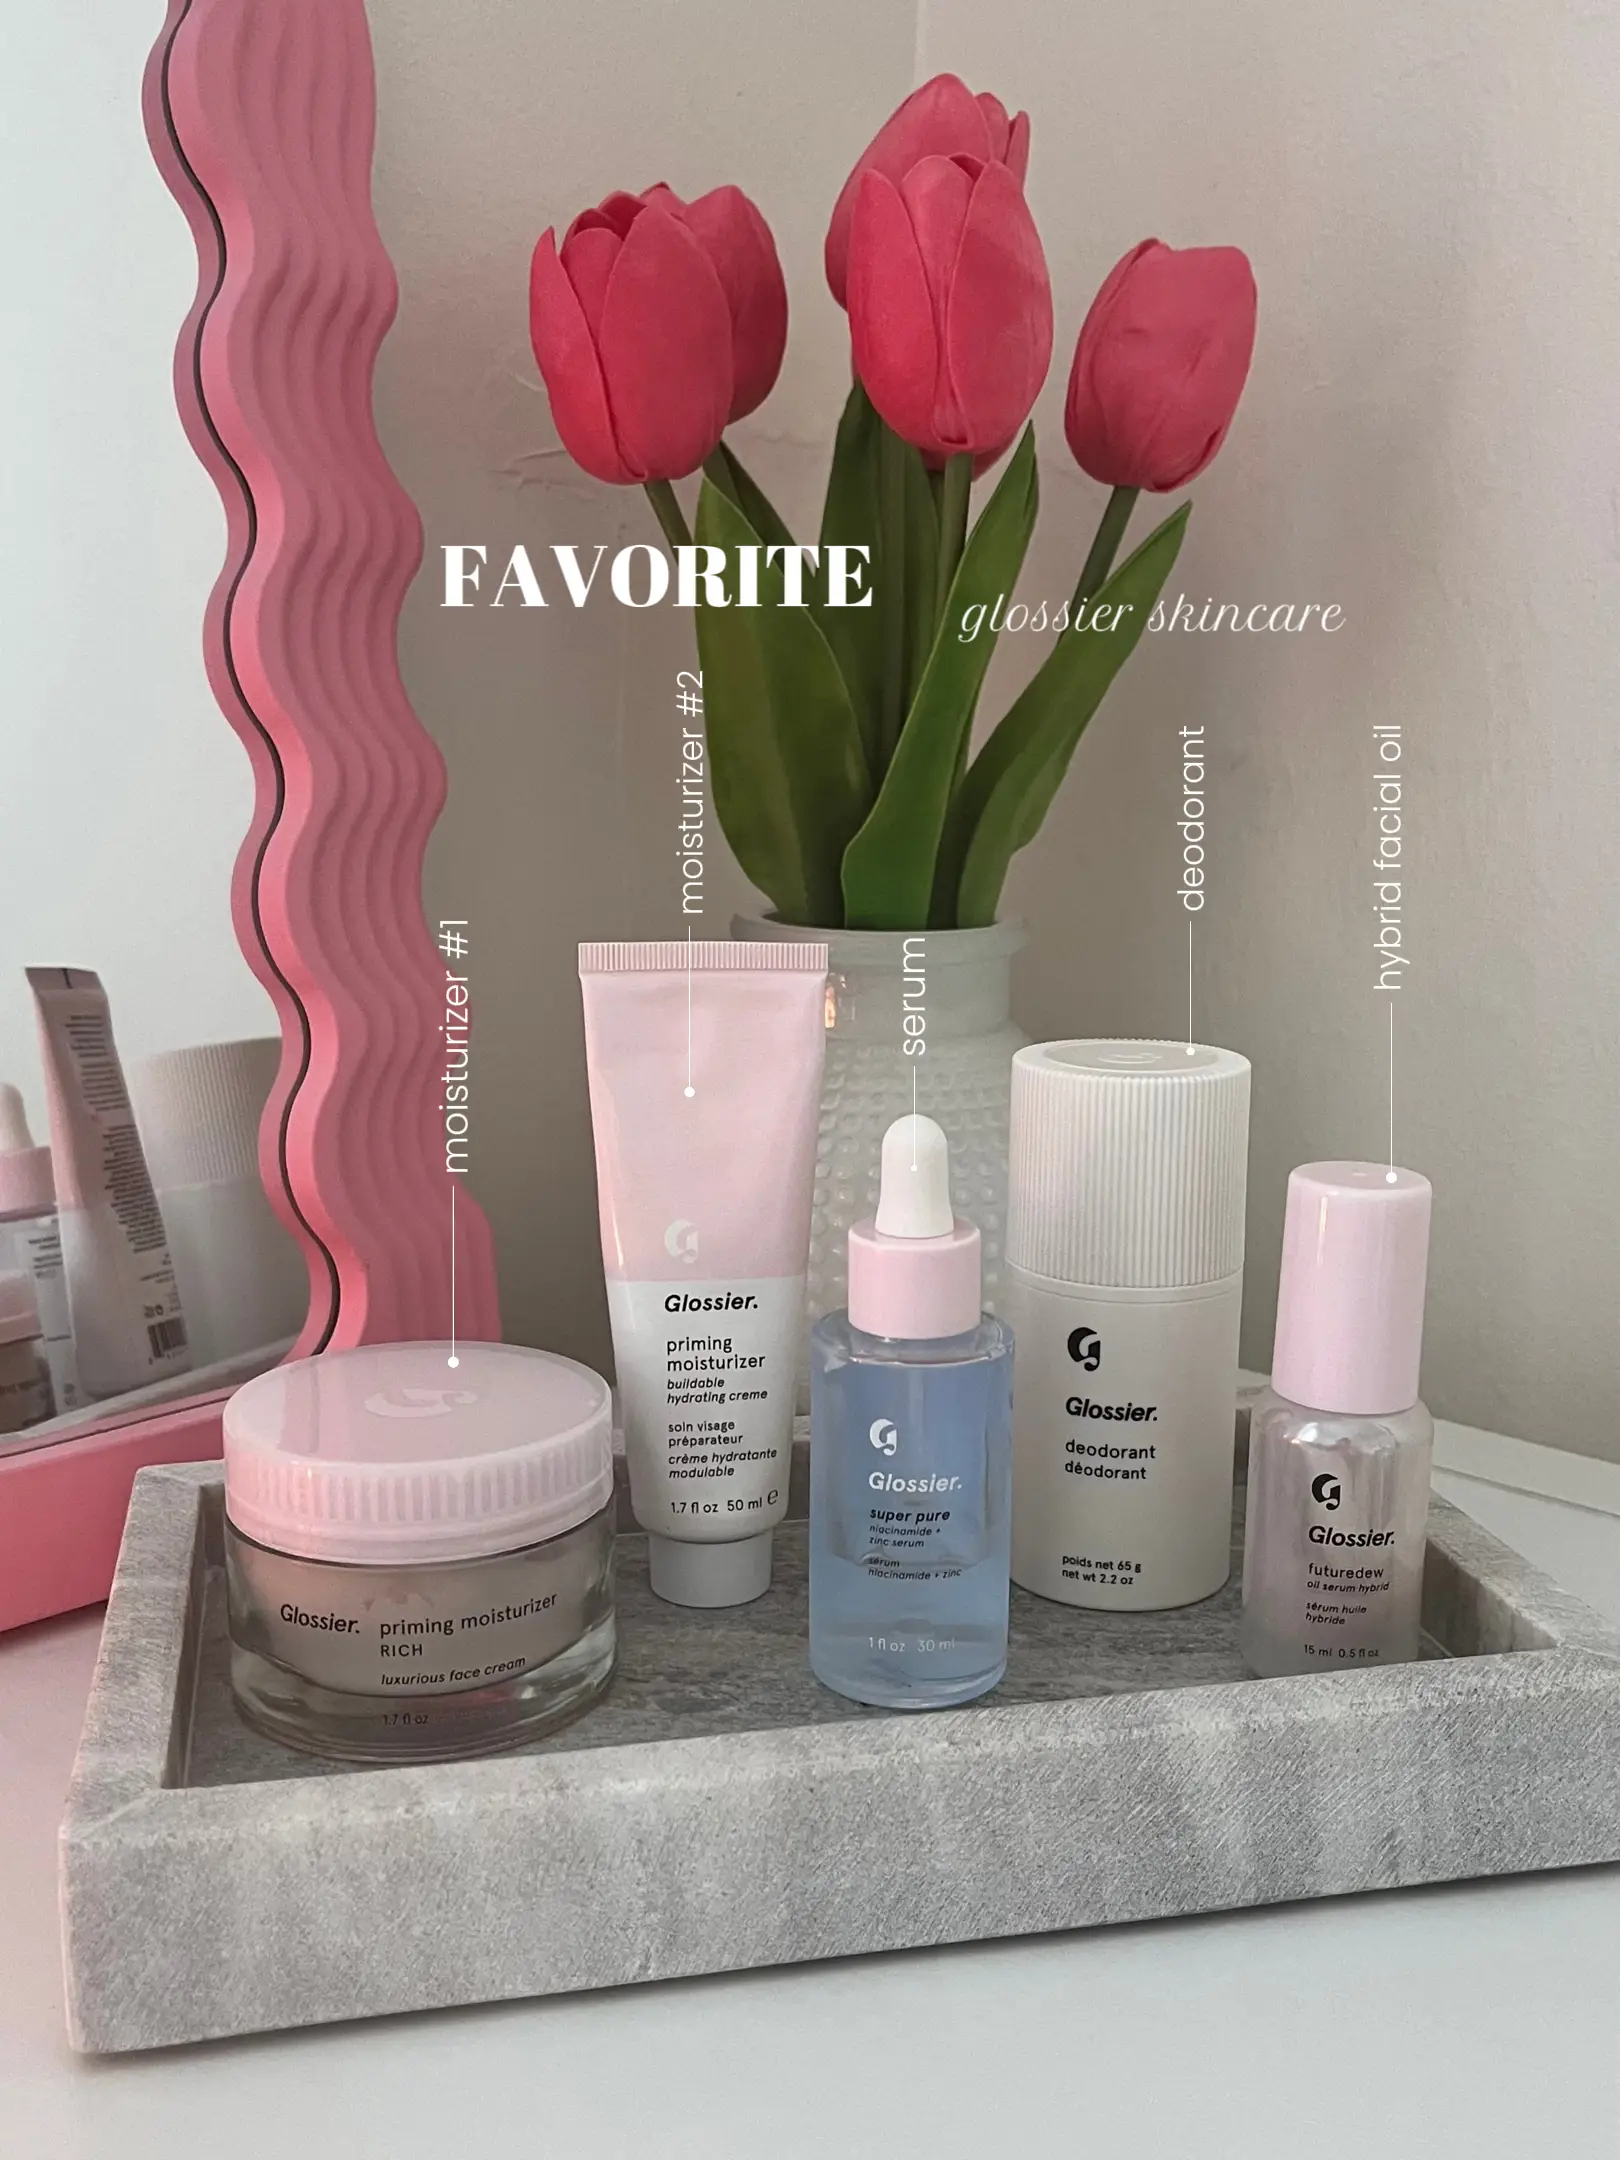 Favorite Glossier Skincare ✨🫶, Gallery posted by natalie